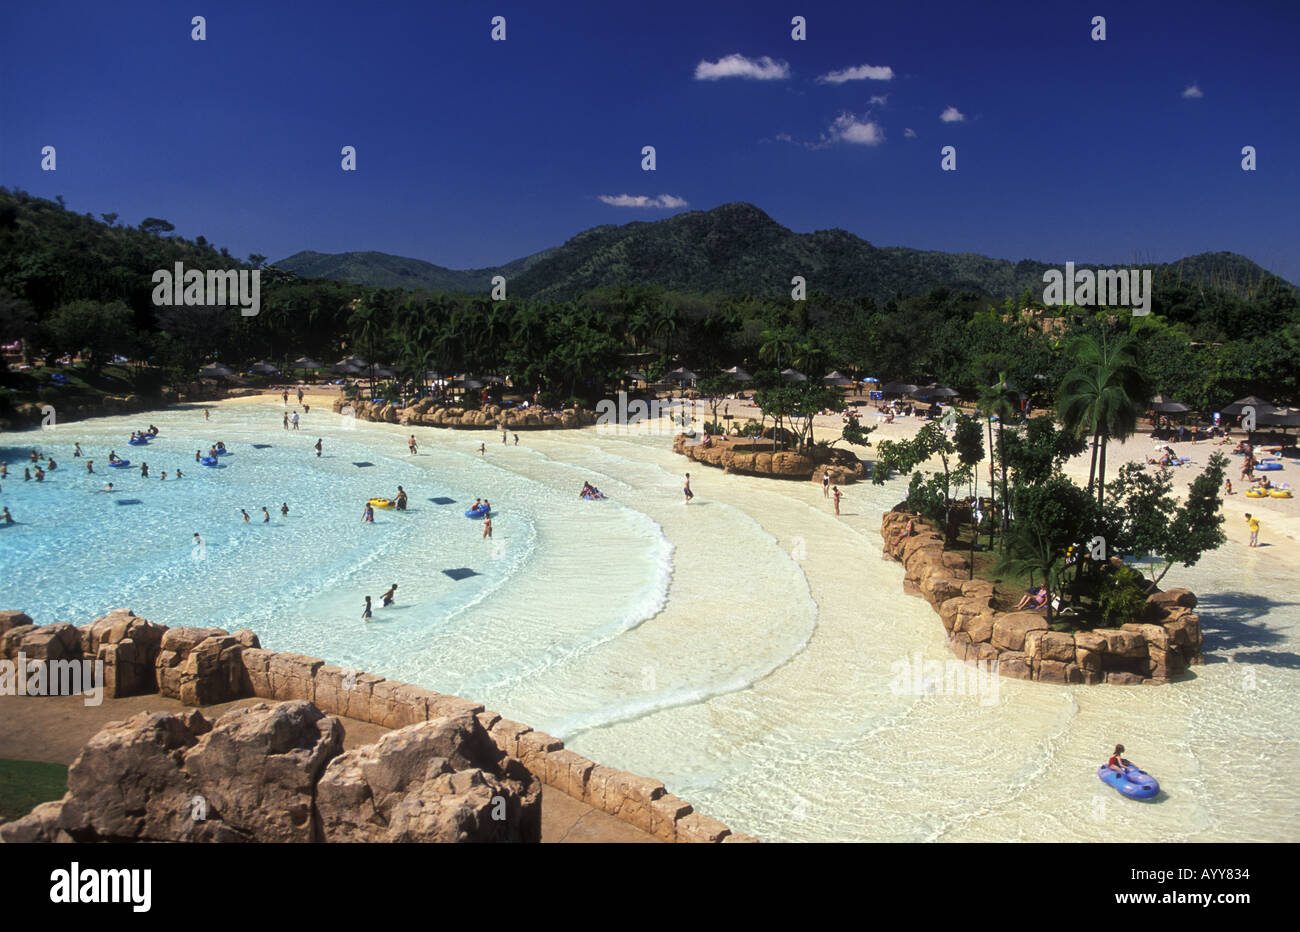 Man made beach at the Lost City complex Sun City South Africa There are many swimmers and bathers Some have rubber boats Stock Photo